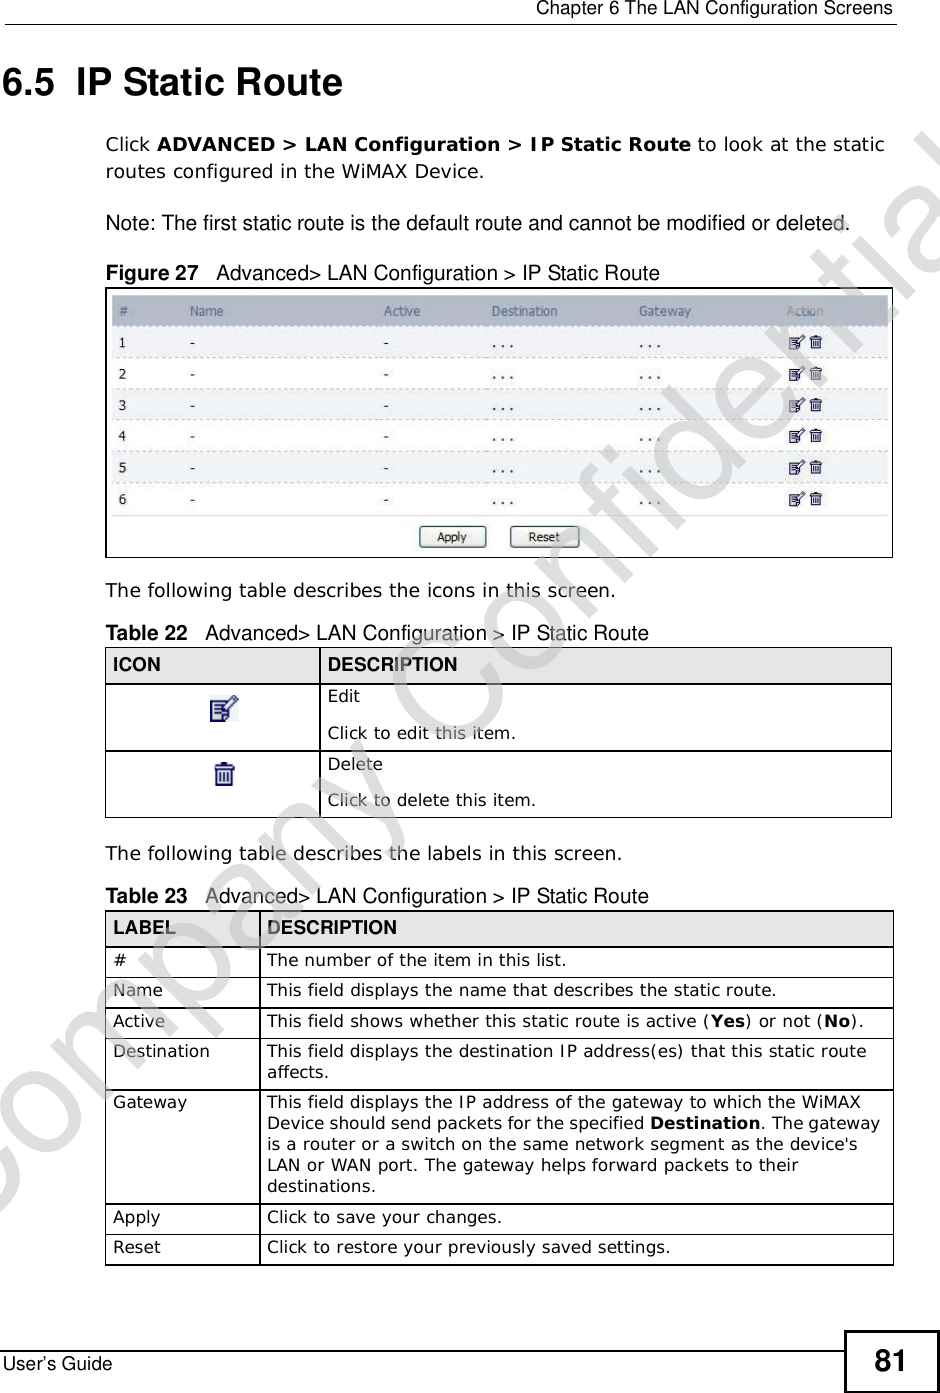  Chapter 6The LAN Configuration ScreensUser’s Guide 816.5  IP Static RouteClick ADVANCED &gt; LAN Configuration &gt; IP Static Route to look at the static routes configured in the WiMAX Device.Note: The first static route is the default route and cannot be modified or deleted.Figure 27   Advanced&gt; LAN Configuration &gt; IP Static RouteThe following table describes the icons in this screen.The following table describes the labels in this screen. Table 22   Advanced&gt; LAN Configuration &gt; IP Static RouteICON DESCRIPTIONEditClick to edit this item.DeleteClick to delete this item.Table 23   Advanced&gt; LAN Configuration &gt; IP Static RouteLABEL DESCRIPTION#The number of the item in this list.Name This field displays the name that describes the static route.Active This field shows whether this static route is active (Yes) or not (No).Destination This field displays the destination IP address(es) that this static route affects.Gateway This field displays the IP address of the gateway to which the WiMAX Device should send packets for the specified Destination. The gateway is a router or a switch on the same network segment as the device&apos;s LAN or WAN port. The gateway helps forward packets to their destinations.Apply Click to save your changes.Reset Click to restore your previously saved settings.Company Confidential